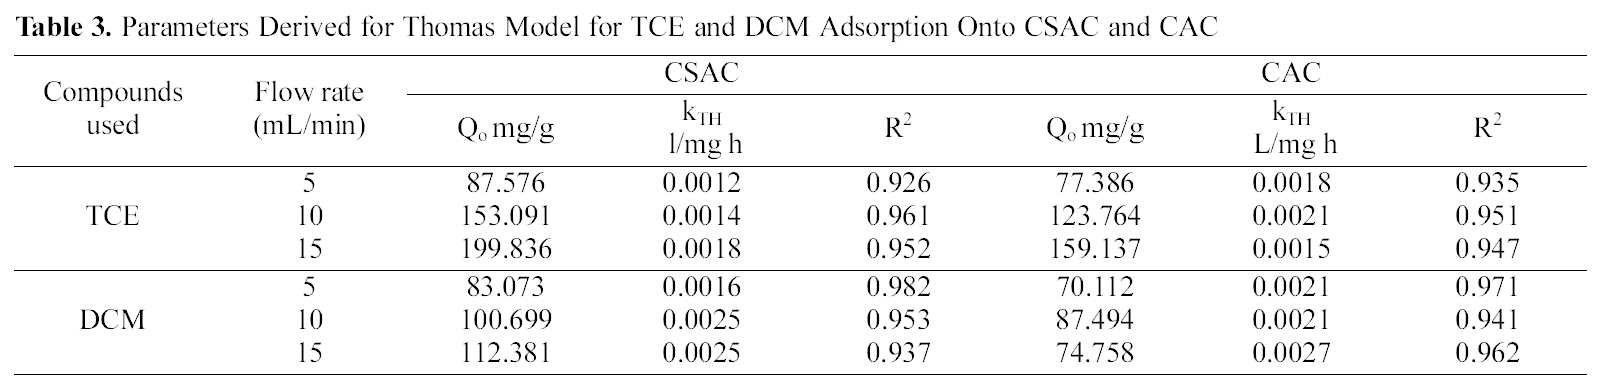 Parameters Derived for Thomas Model for TCE and DCM Adsorption Onto CSAC and CAC